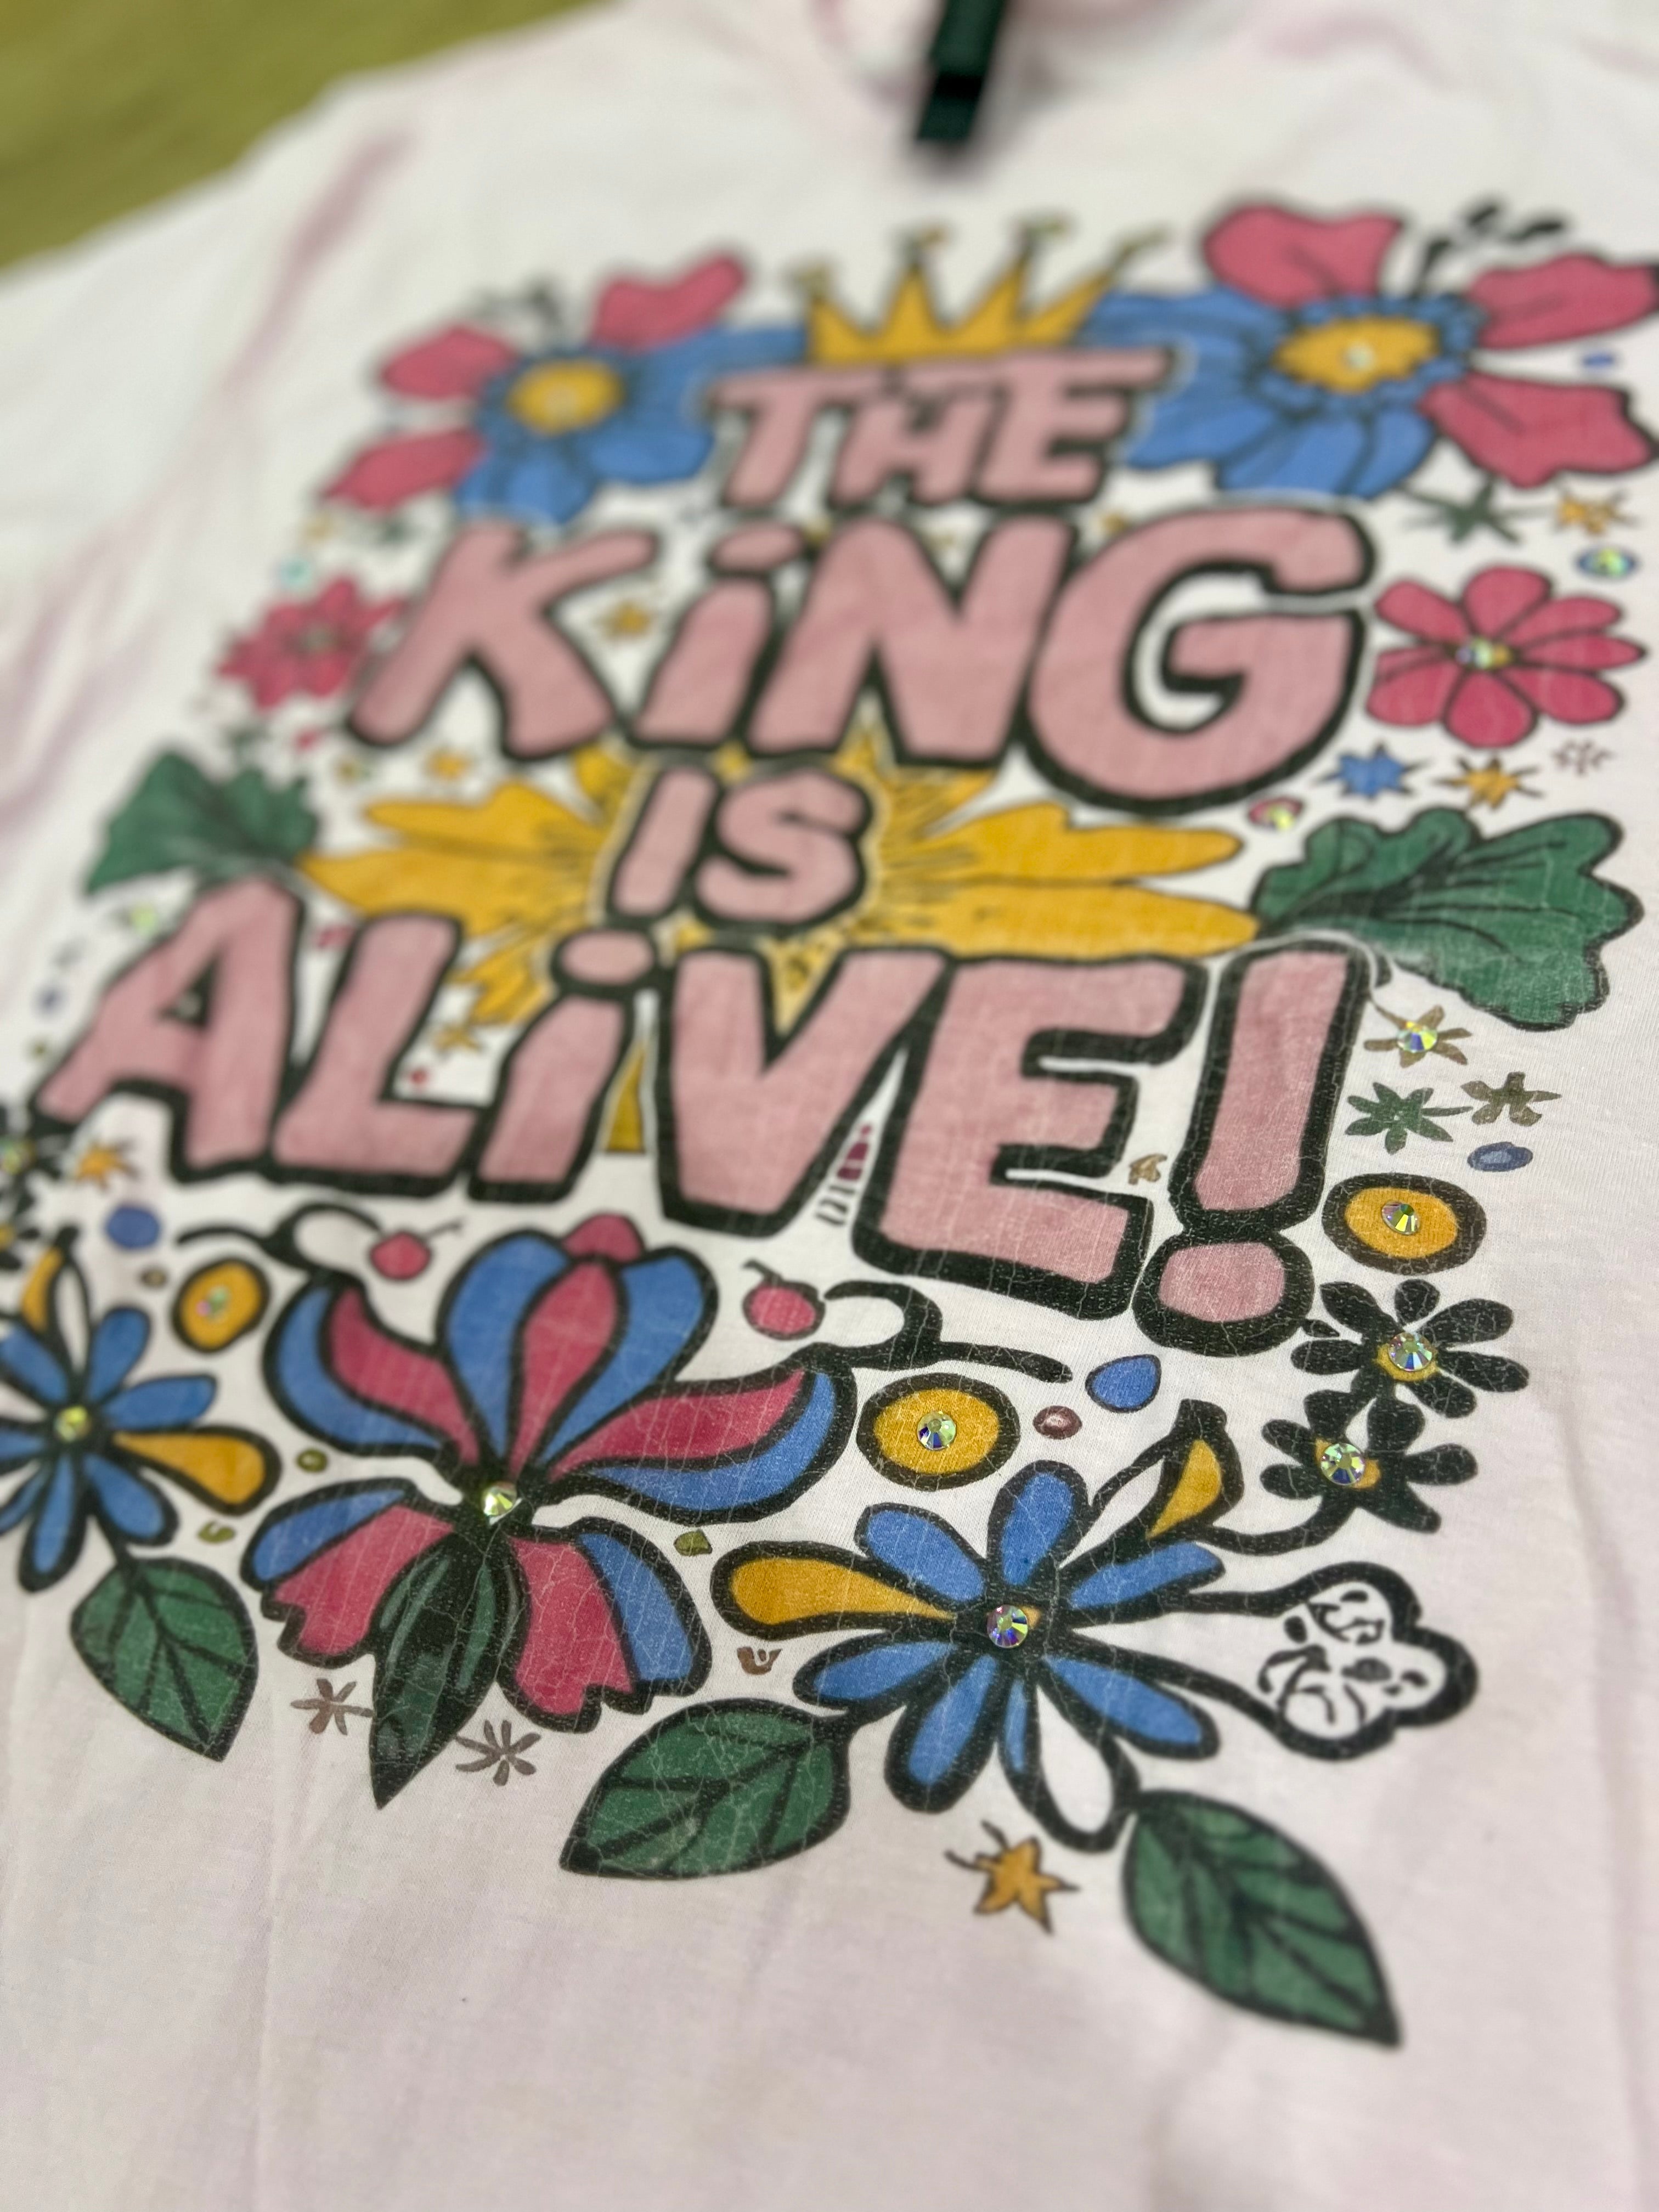 The King is Alive